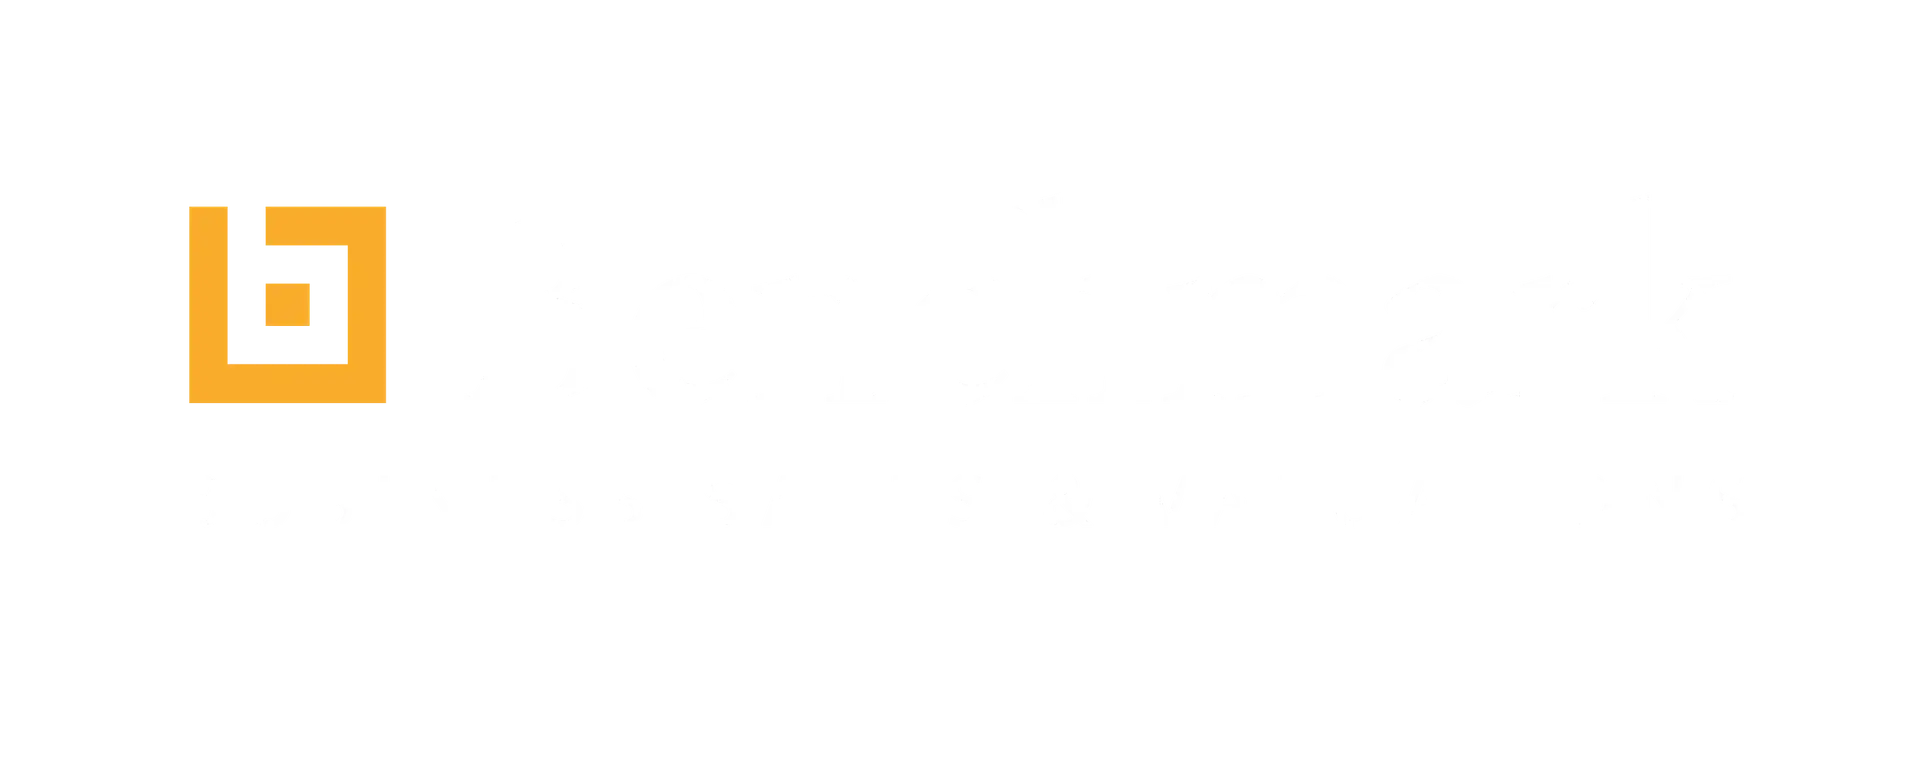 Business Brokers - Benchmark Business Sales & Valuations